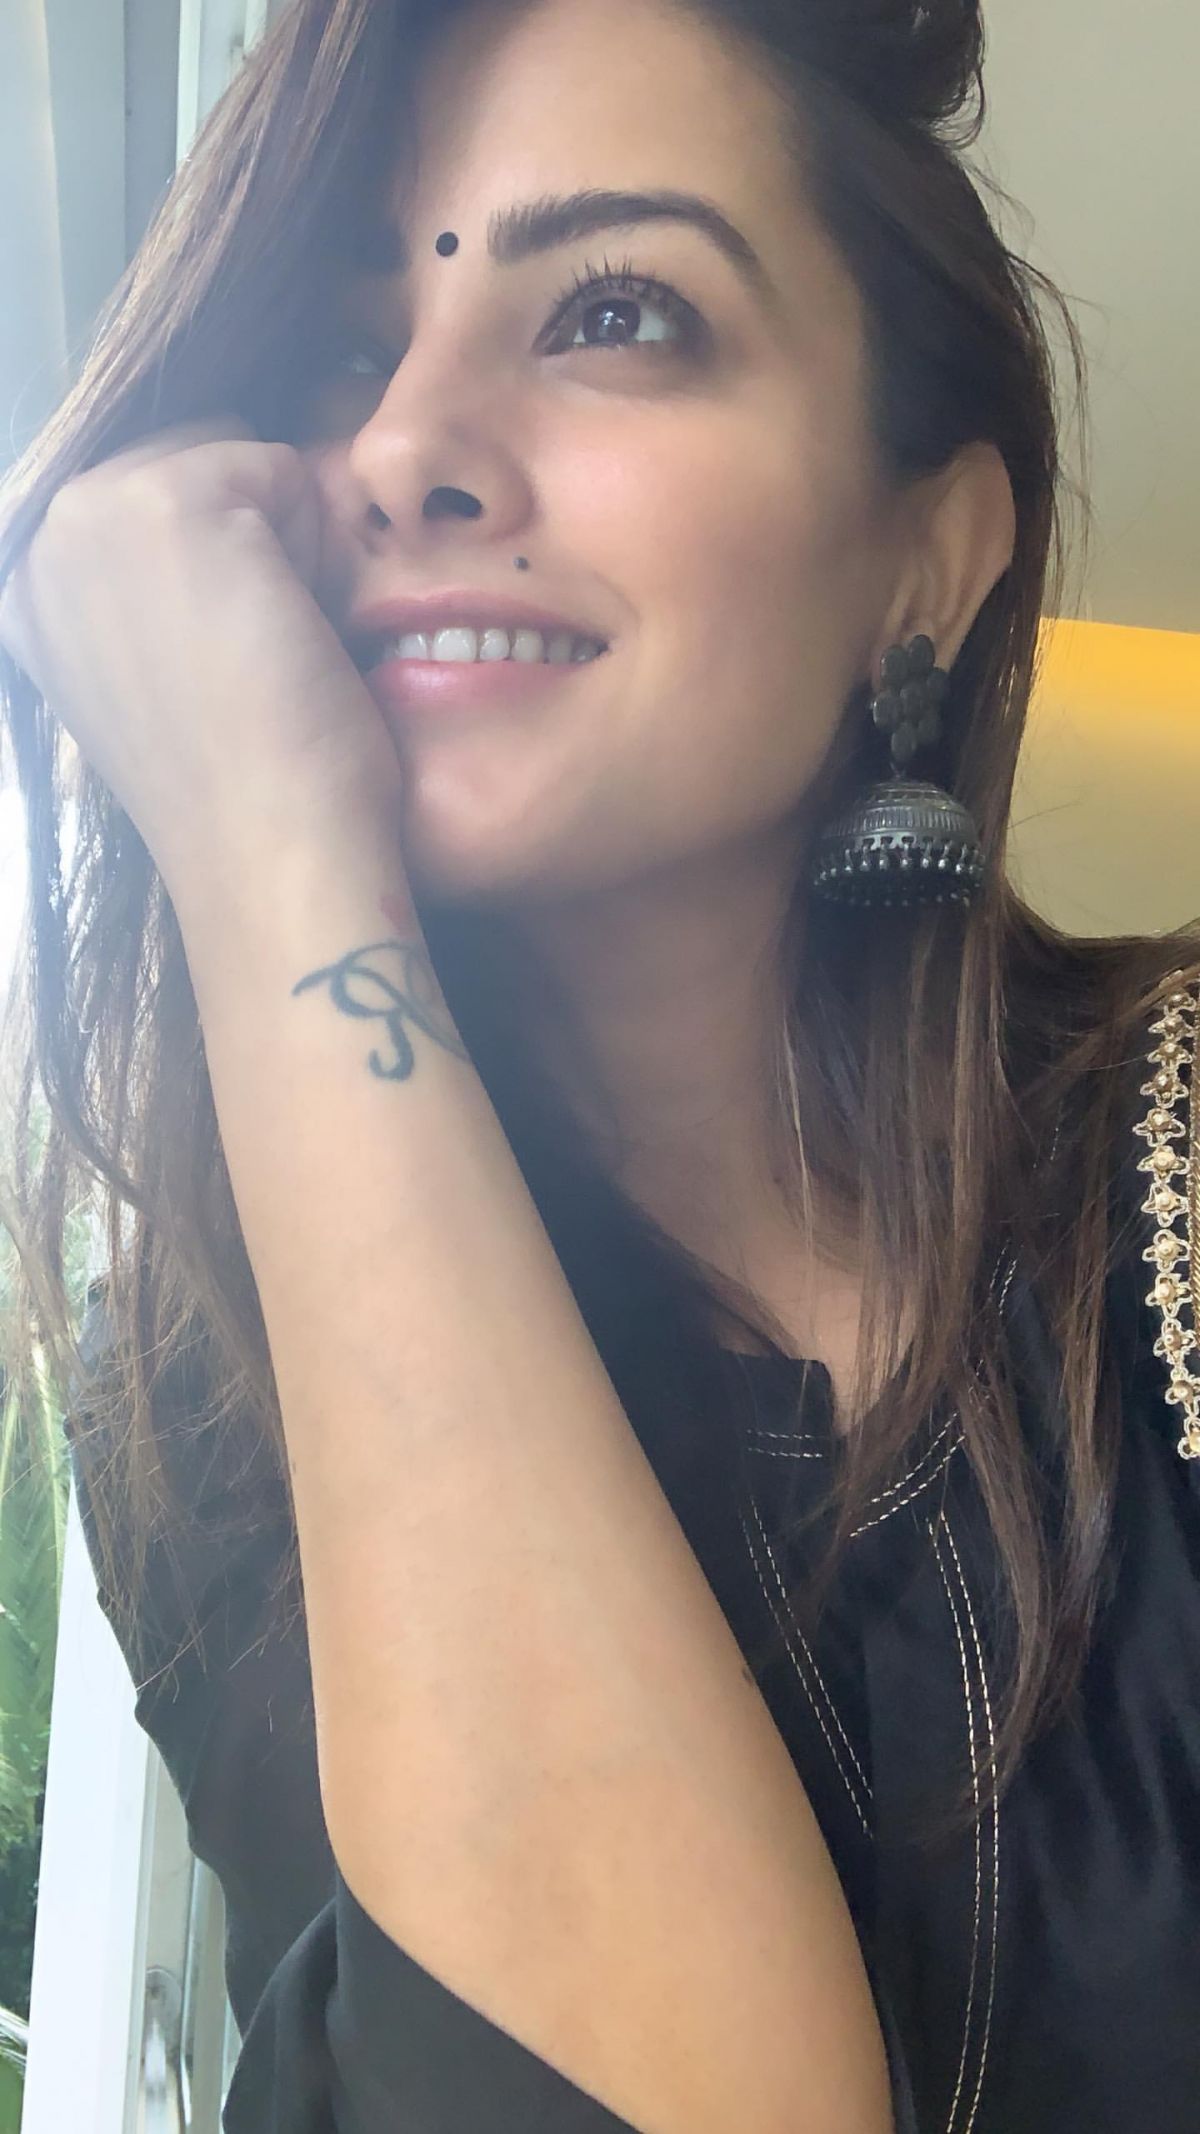 Anita Hassanandani trolled for sharing photo, fans say 'At the moment we don't care...'